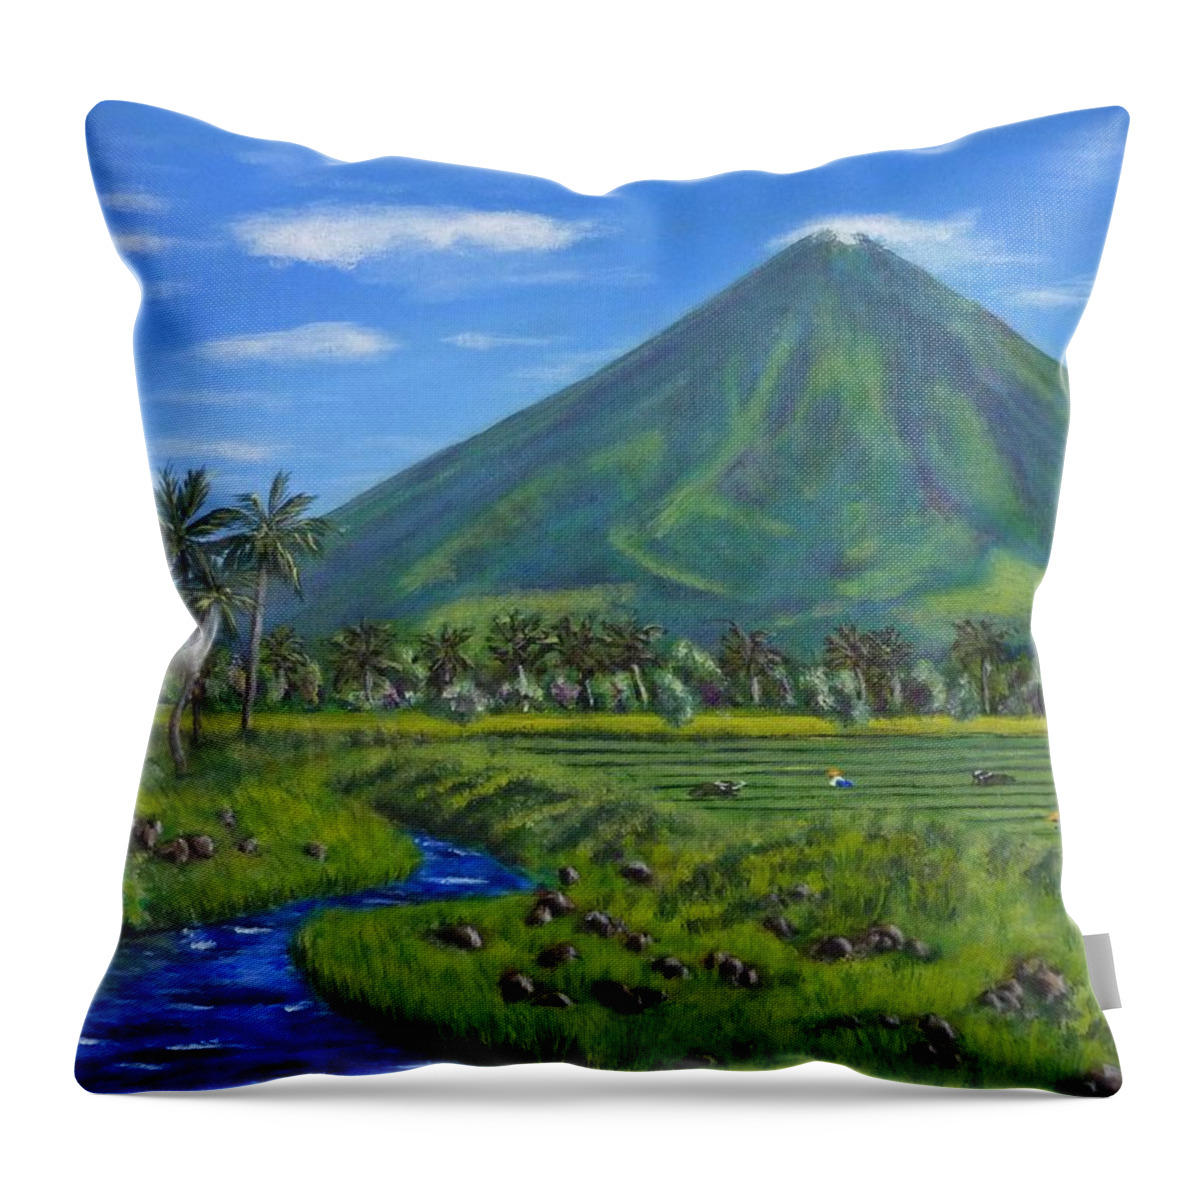 Mayon Volcano Throw Pillow featuring the painting Mayon Volcano by Amelie Simmons